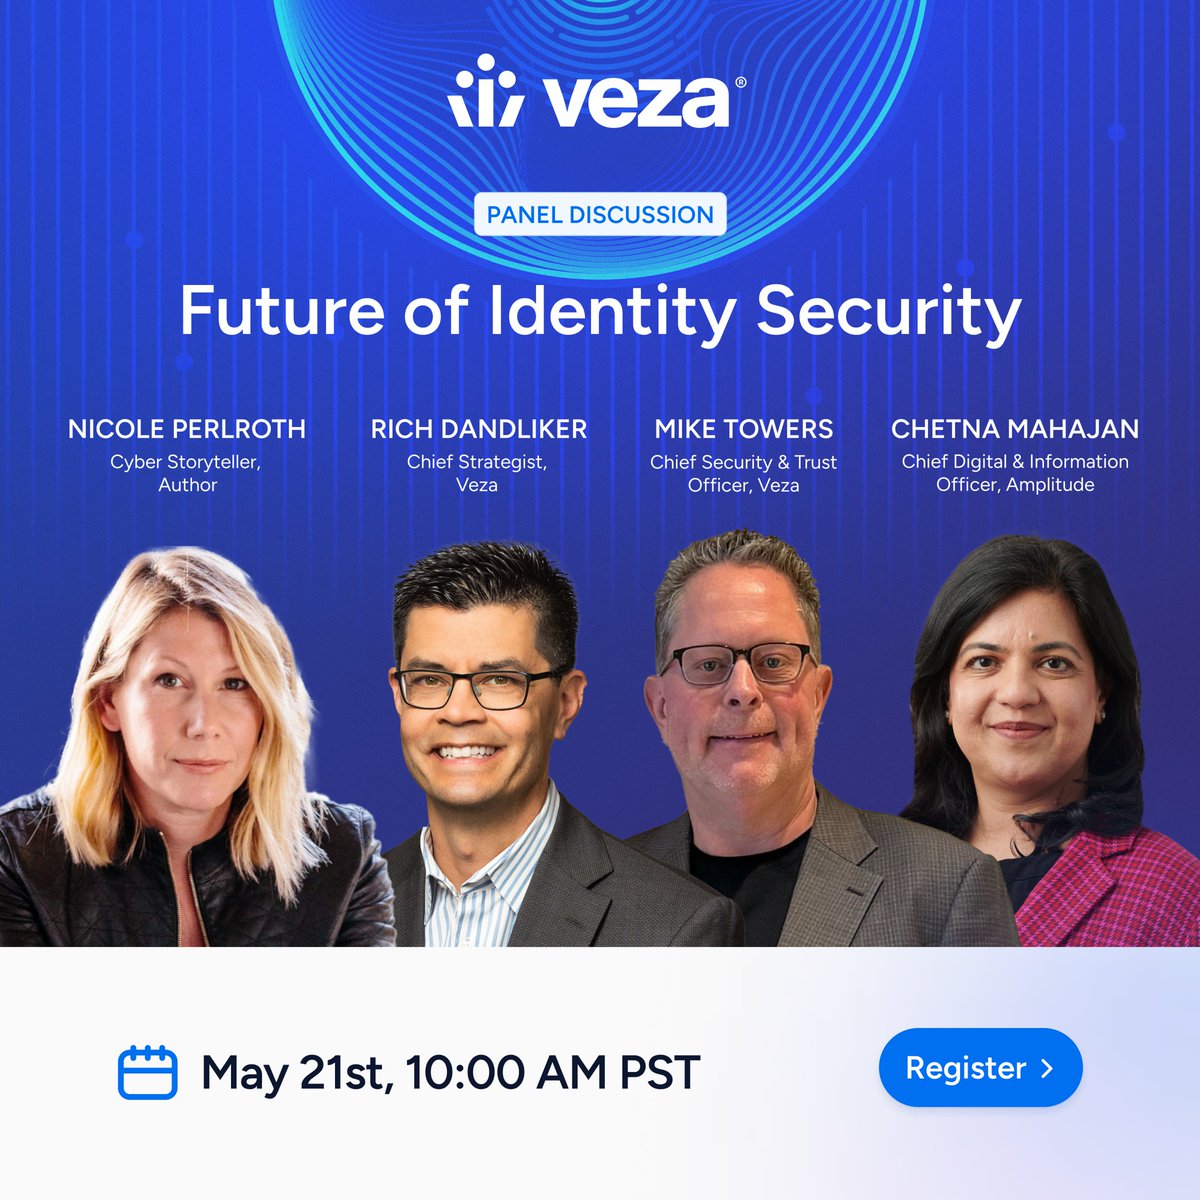 Tune in to hear #cybersecurity leaders Nicole Perlroth, Rich Dandliker, Cheta Mahajan and Michael Towers discuss the future of #identitysecurity on May 21st! RSVP today ➡️ bit.ly/3JGPhH3